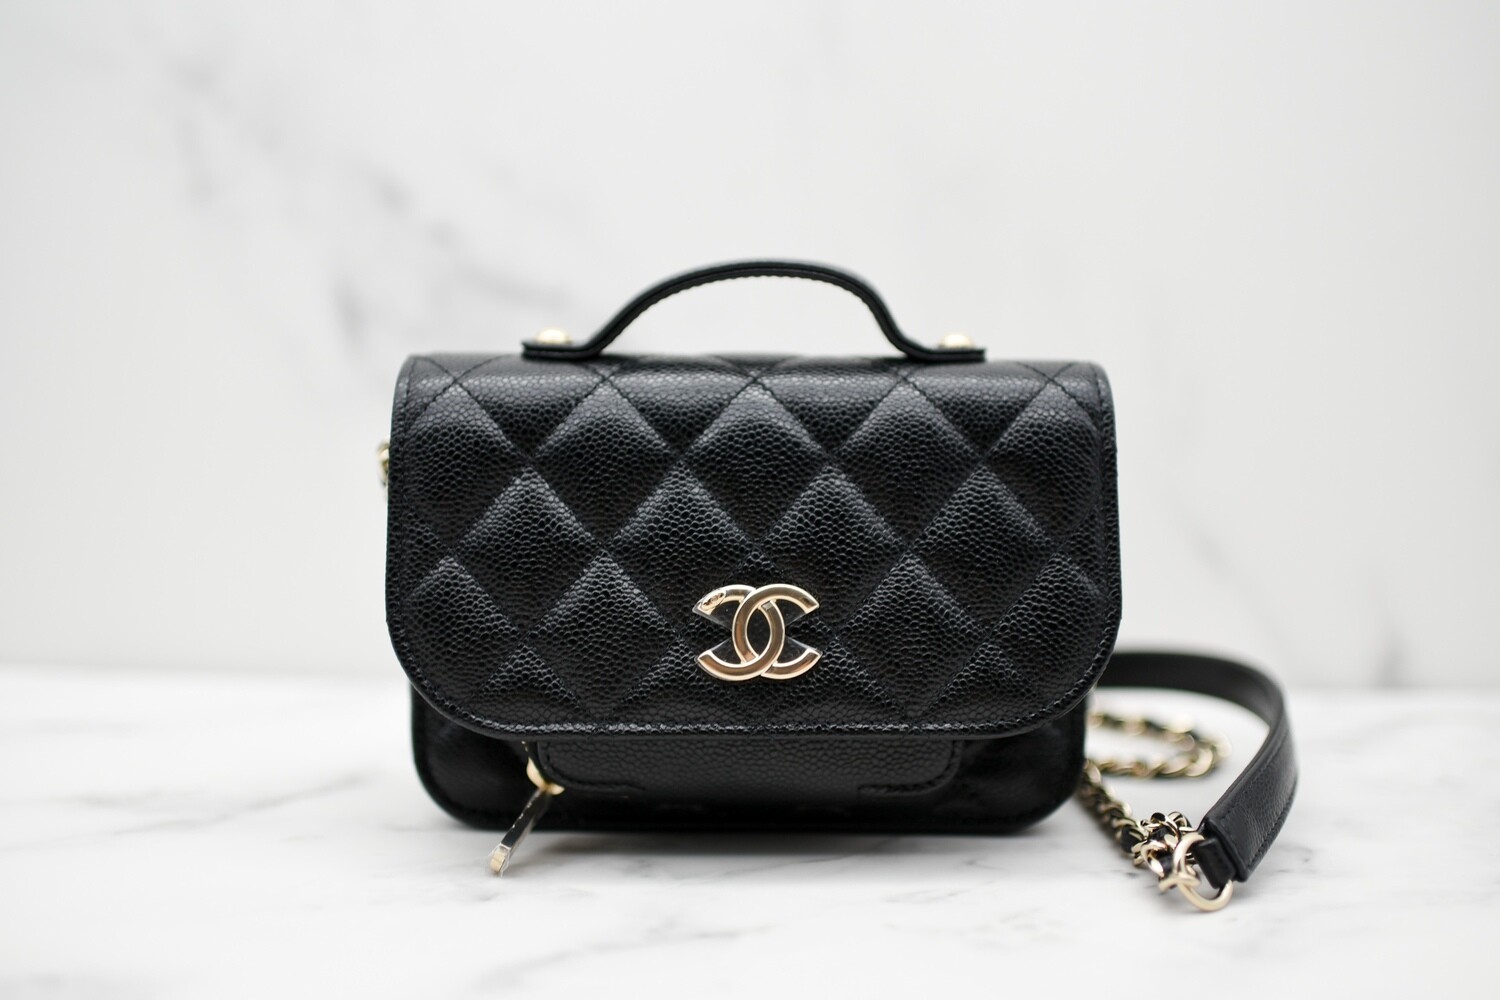 Chanel Business Affinity Clutch with Chain Flap, Black Caviar Leather with  Gold Hardware, New in Box GA002